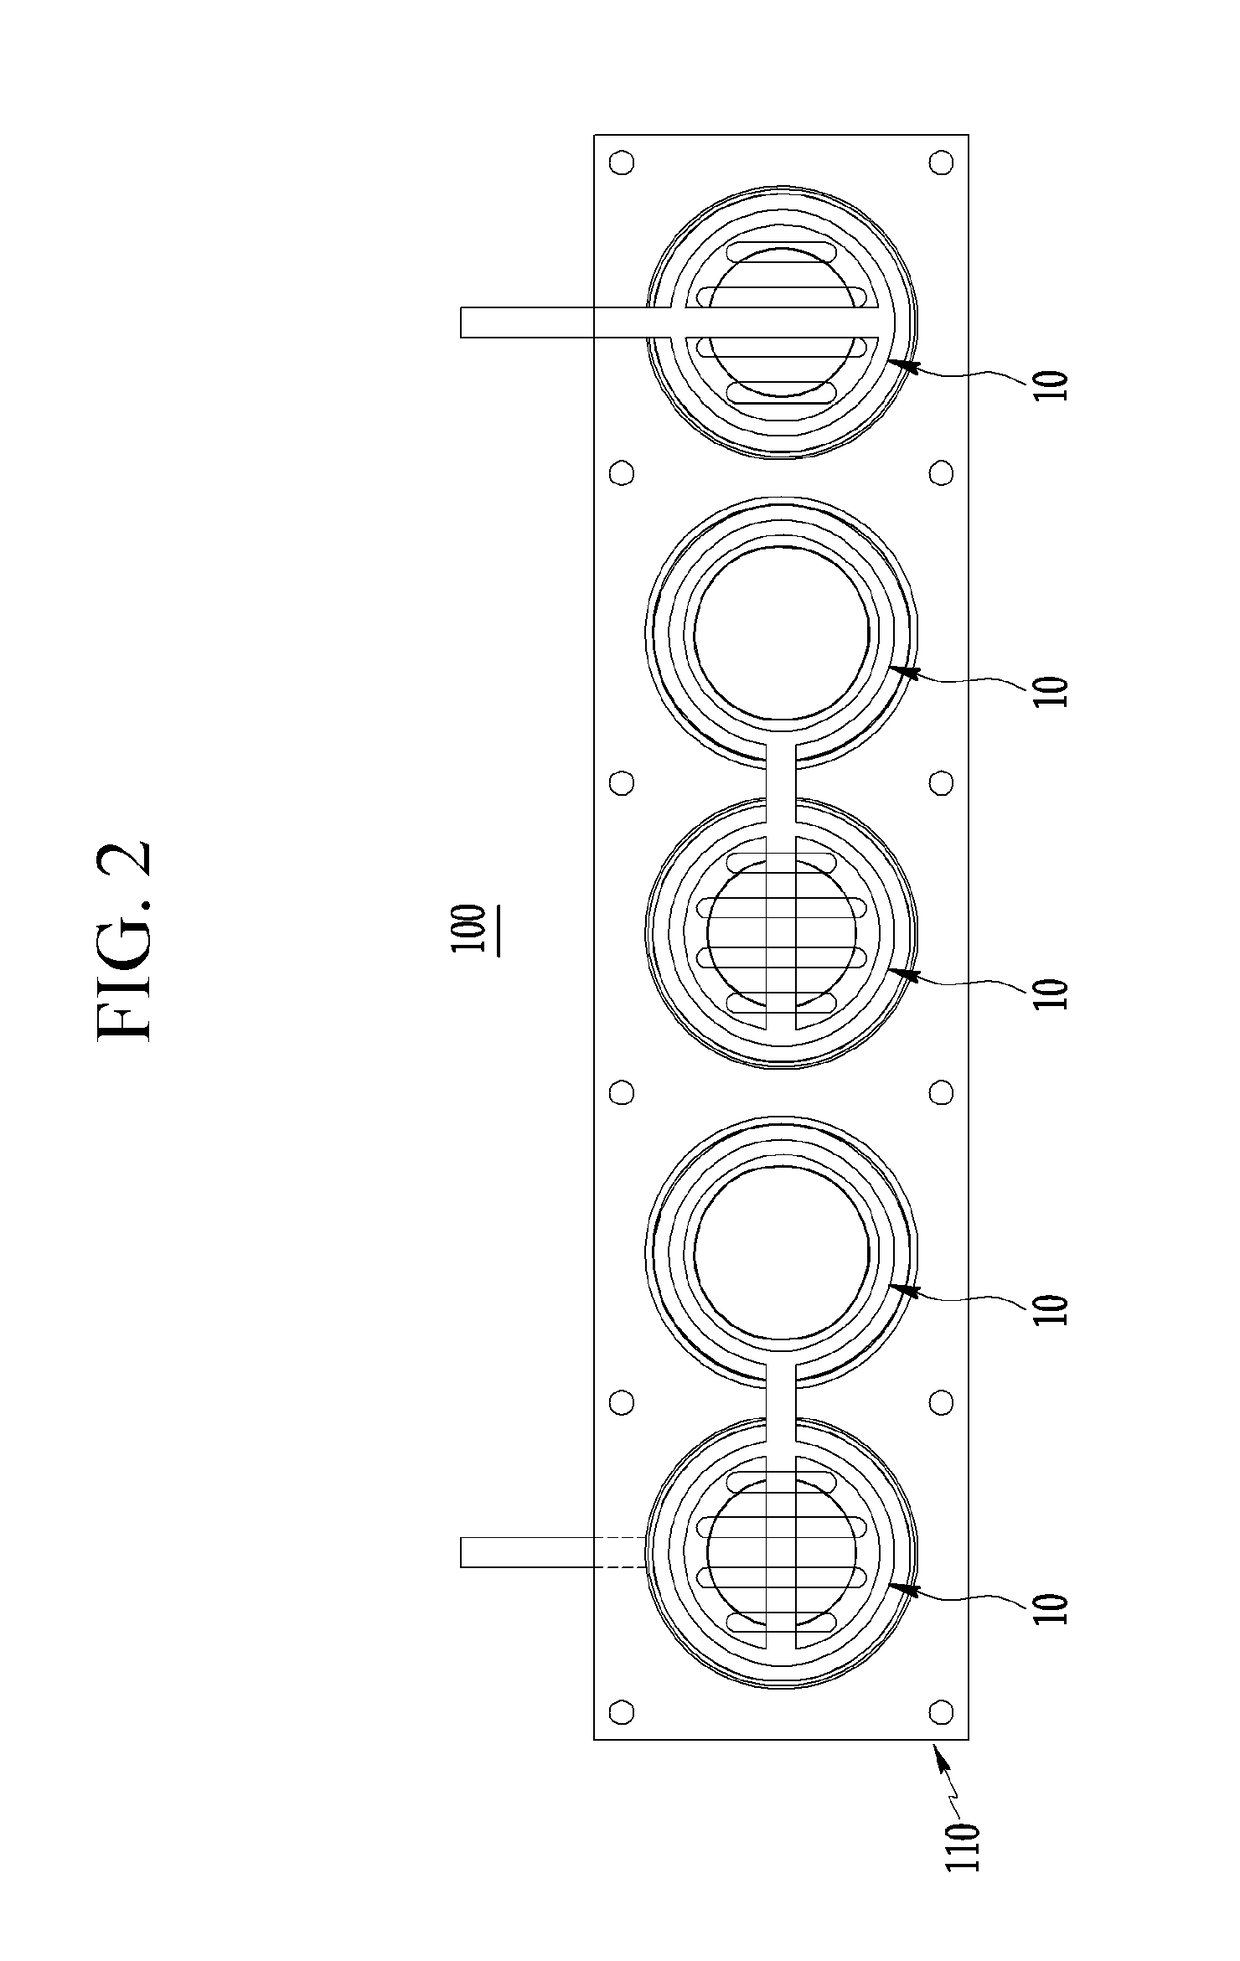 Rechargeable battery module and method for manufacturing the same